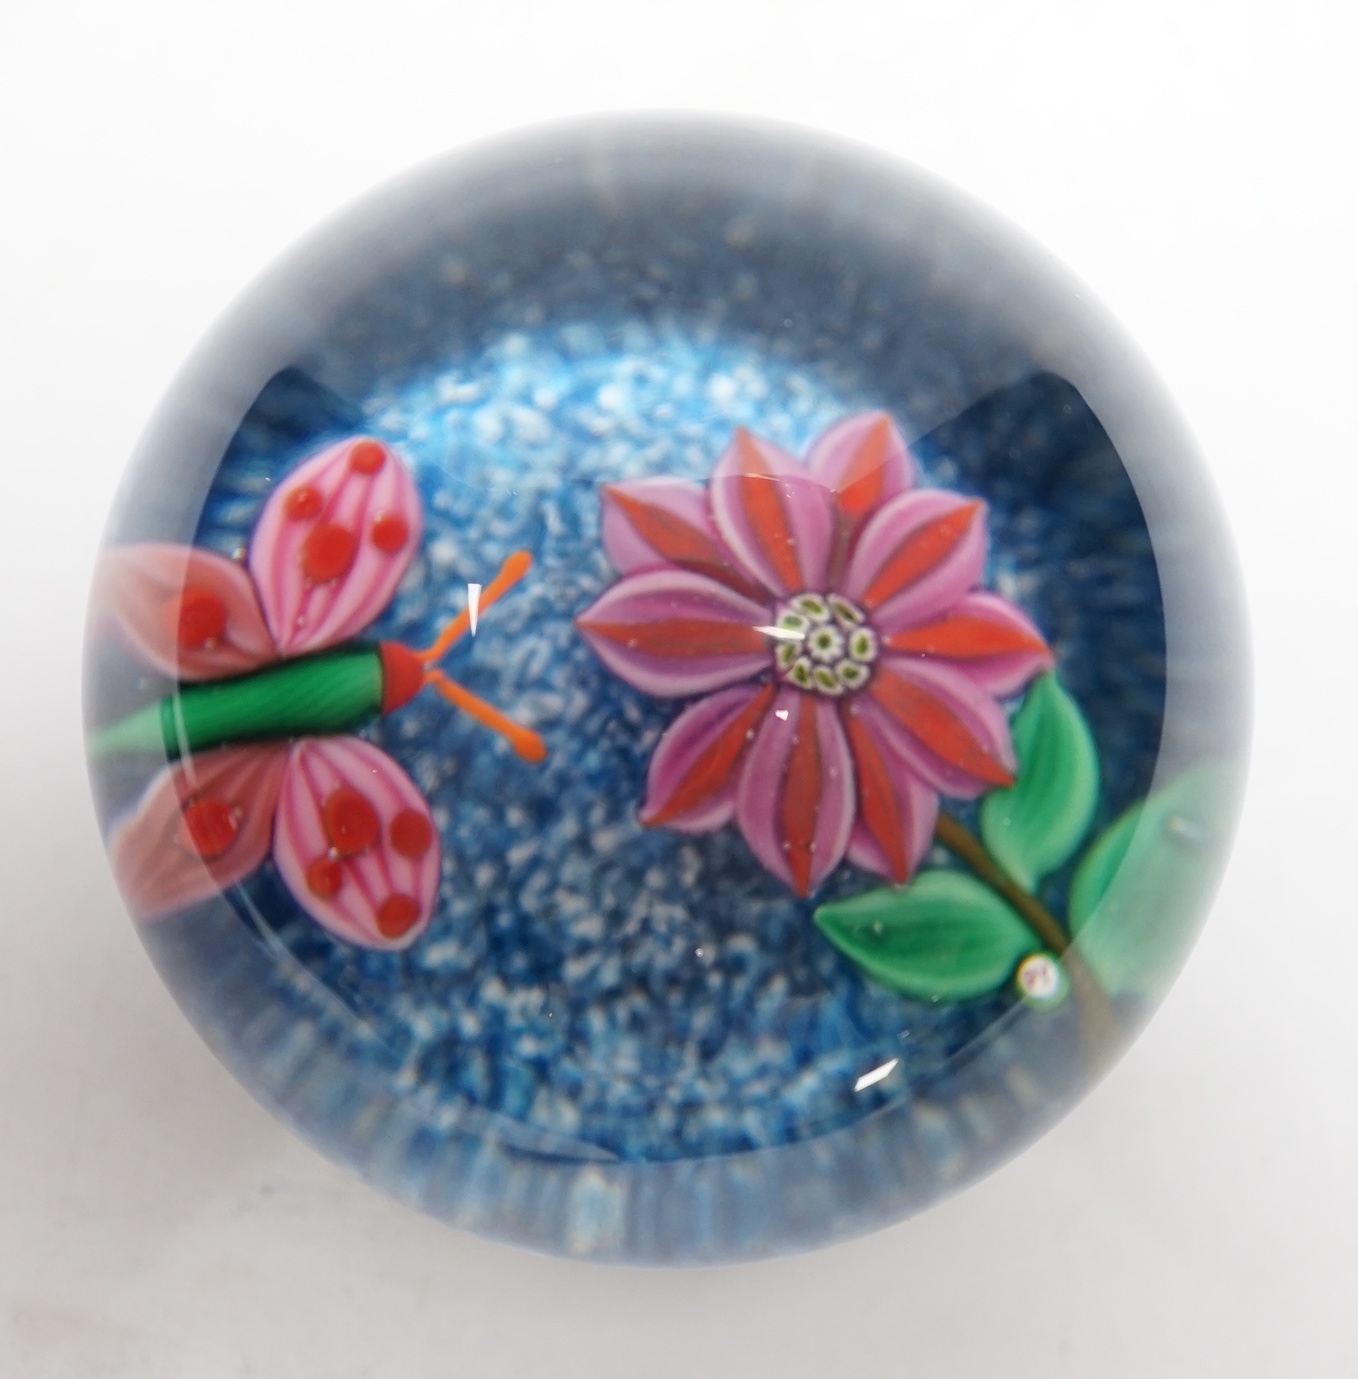 A rare Paul Ysart ‘insect and flower’ footed glass paperweight, Caithness period, scratched signature ‘P. Ysart’, ‘PY’ cane, decorated with a butterfly and pink dahlia, blue jasper ground, raised on a dark green glass fo